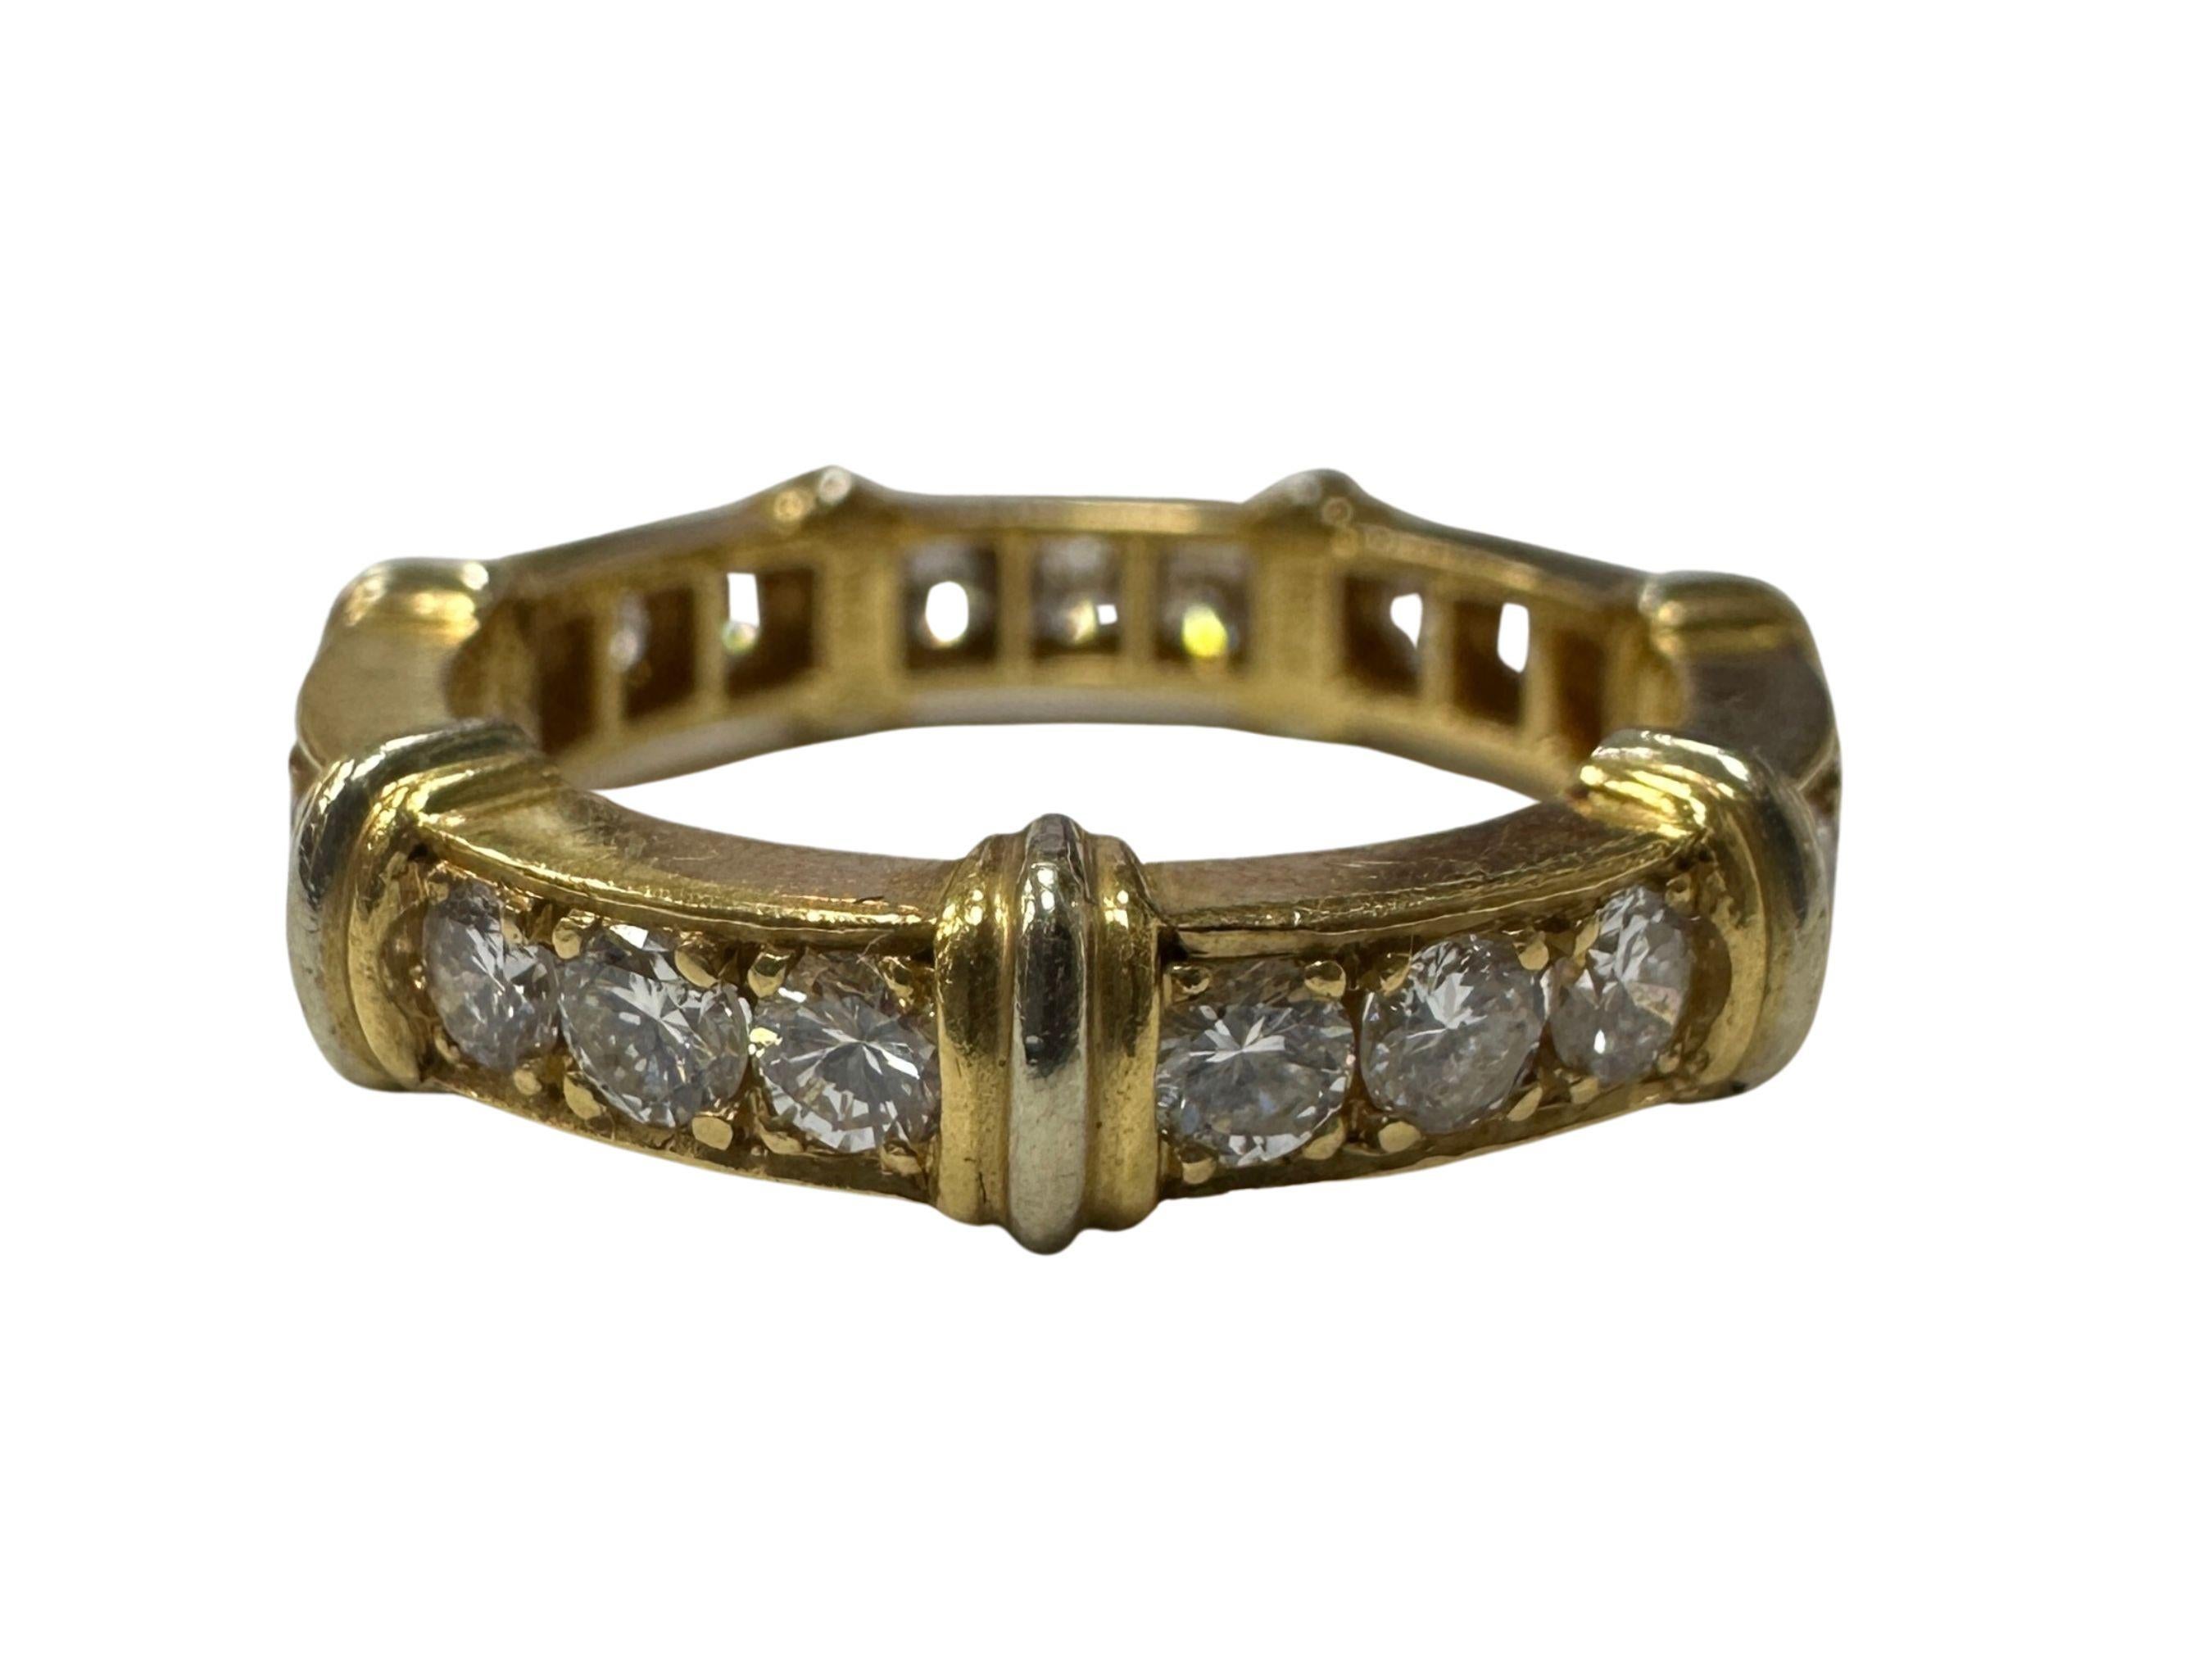 Experience the timeless elegance with this exquisite 18k Cartier Diamond Eternity Band. In very good vintage condition, it showcases a delicate 4.25mm width, standing 1.77mm tall above the finger. Adorned with approximately 1.00 carat of diamonds,